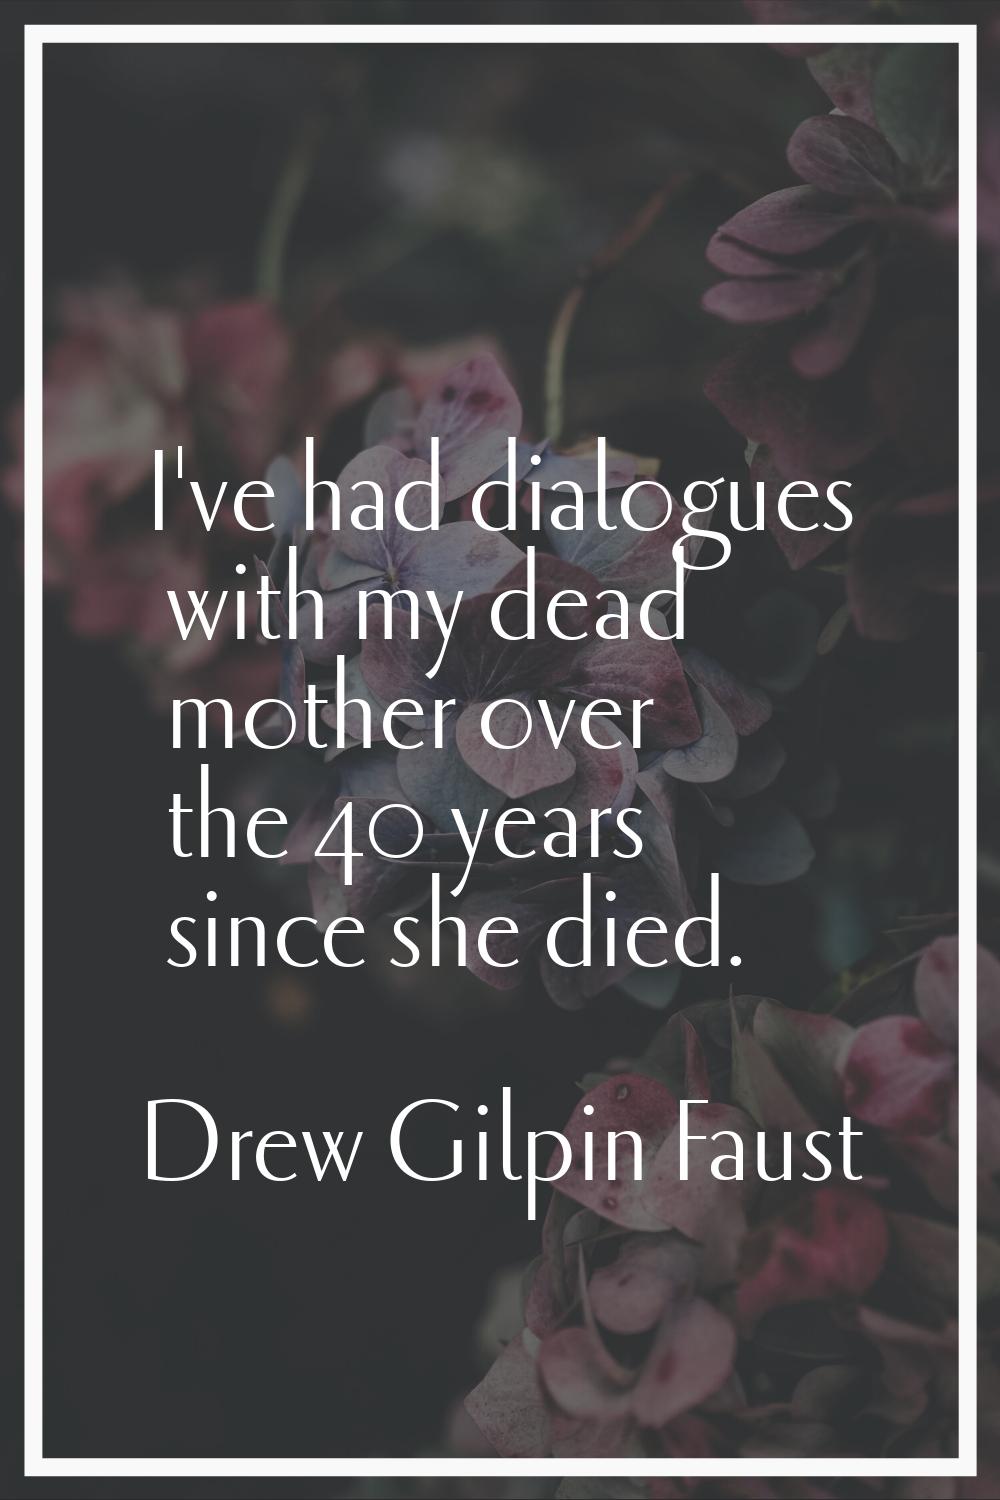 I've had dialogues with my dead mother over the 40 years since she died.